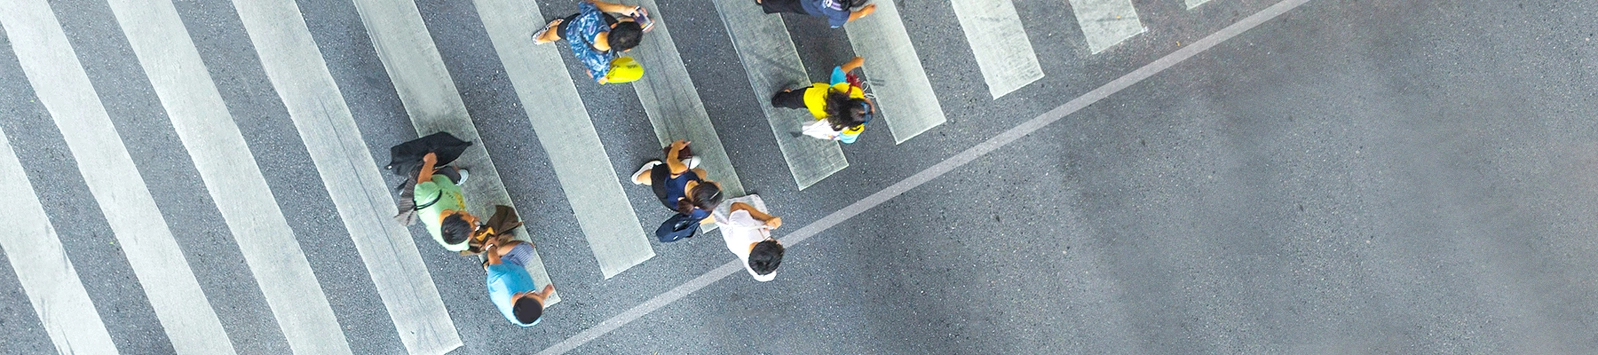 a busy group of people in crosswalk, seen from overhead